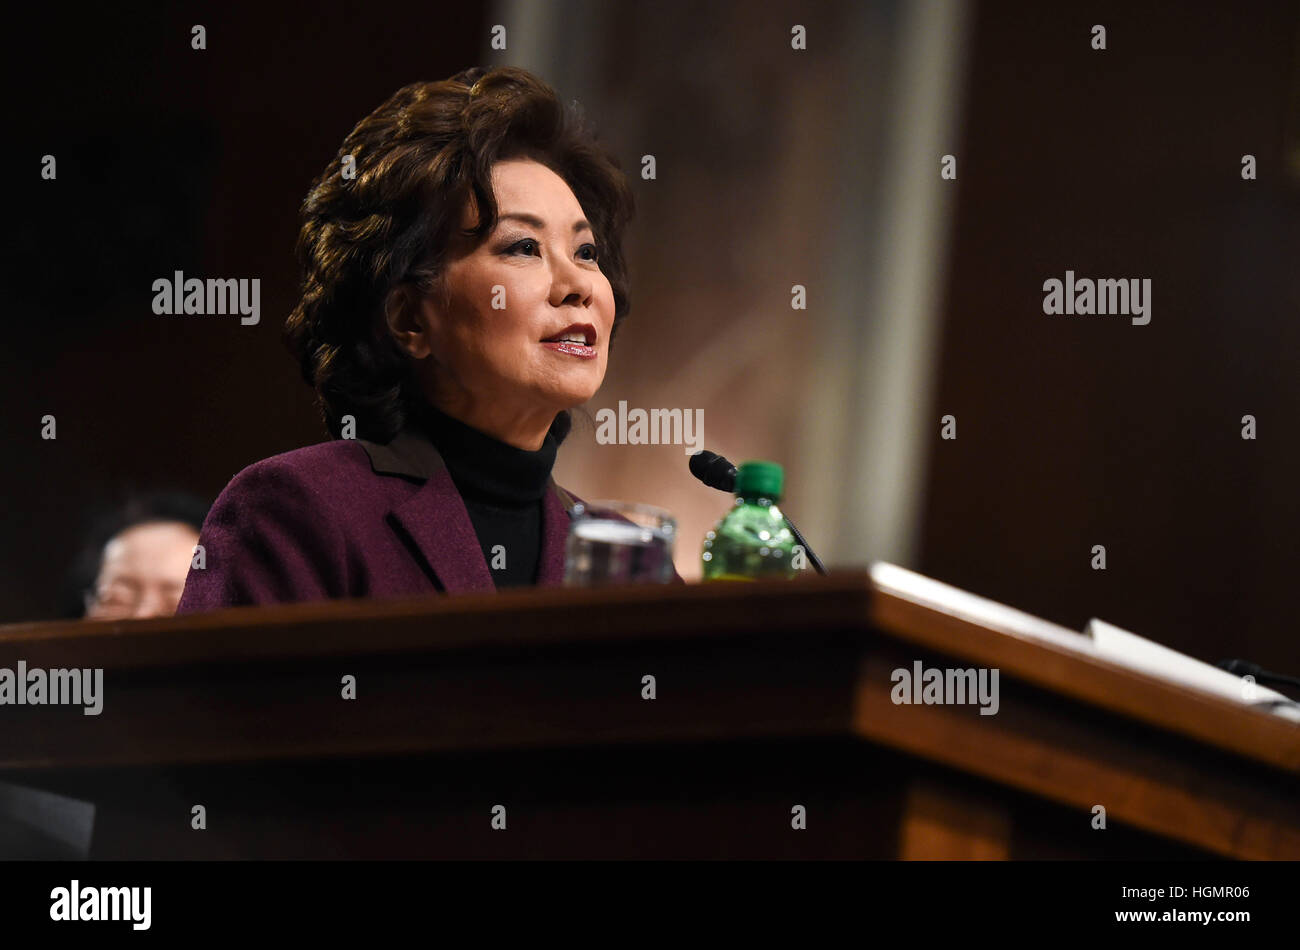 Washington, USA. 11th Jan, 2017. Elaine Chao testifies before the U.S. Senate Commerce, Science, and Transportation Committee during the confirmation hearing on her nomination to be Secretary of Transportation at Capitol Hill in Washington, DC, the United States. Trump's nominee to run the U.S. Department of Transportation Elaine Chao had her confirmation hearing on Wednesday. Chao was Deputy Secretary of Transportation under former Republican President George H.W. Bush, and Labor Secretary under George W. Bush. Credit: Bao Dandan/Xinhua/Alamy Live News Stock Photo